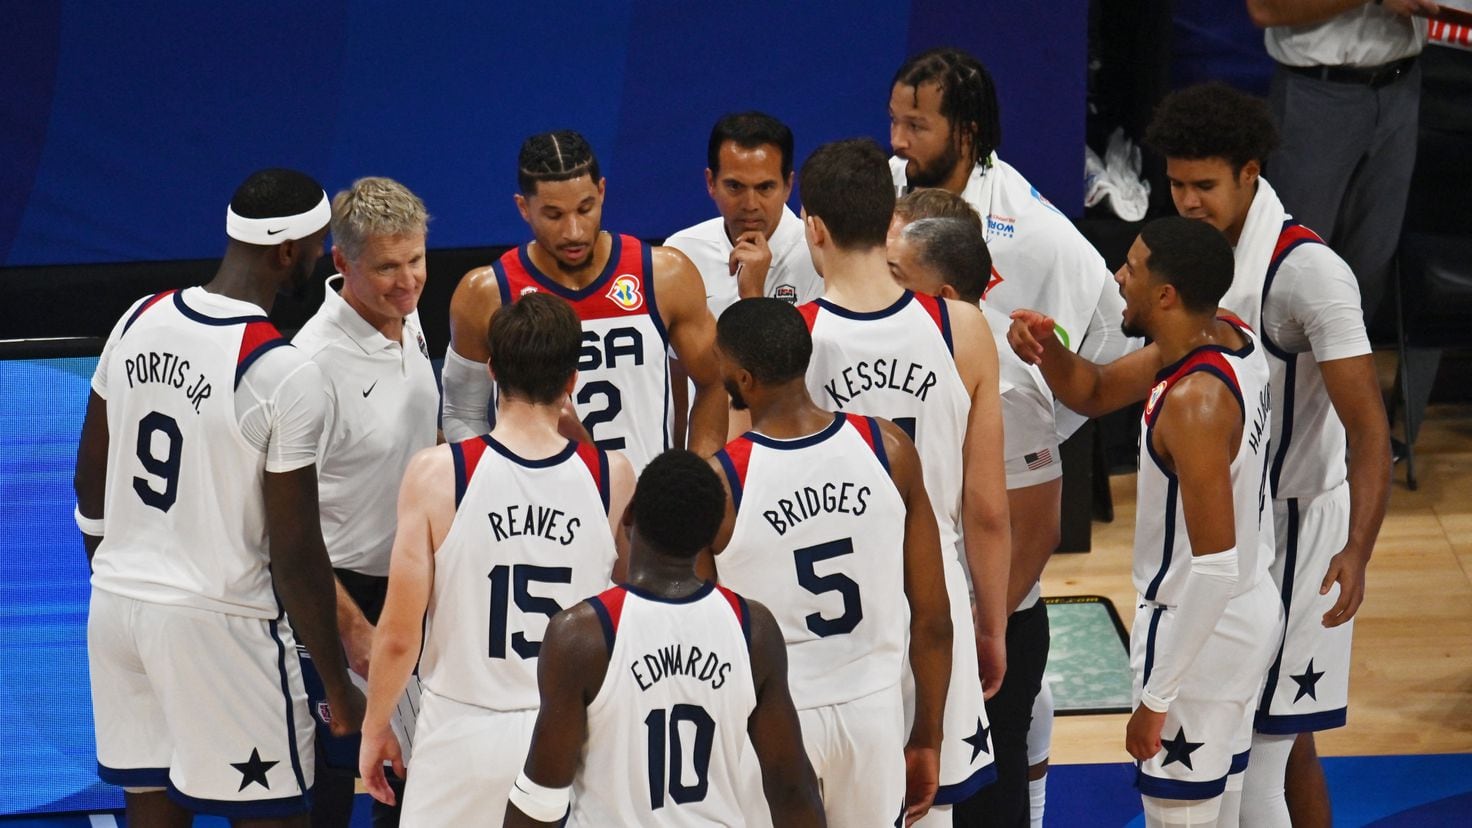 Why aren’t the NBA’s best players participating in the Basketball World Cup with Team USA?